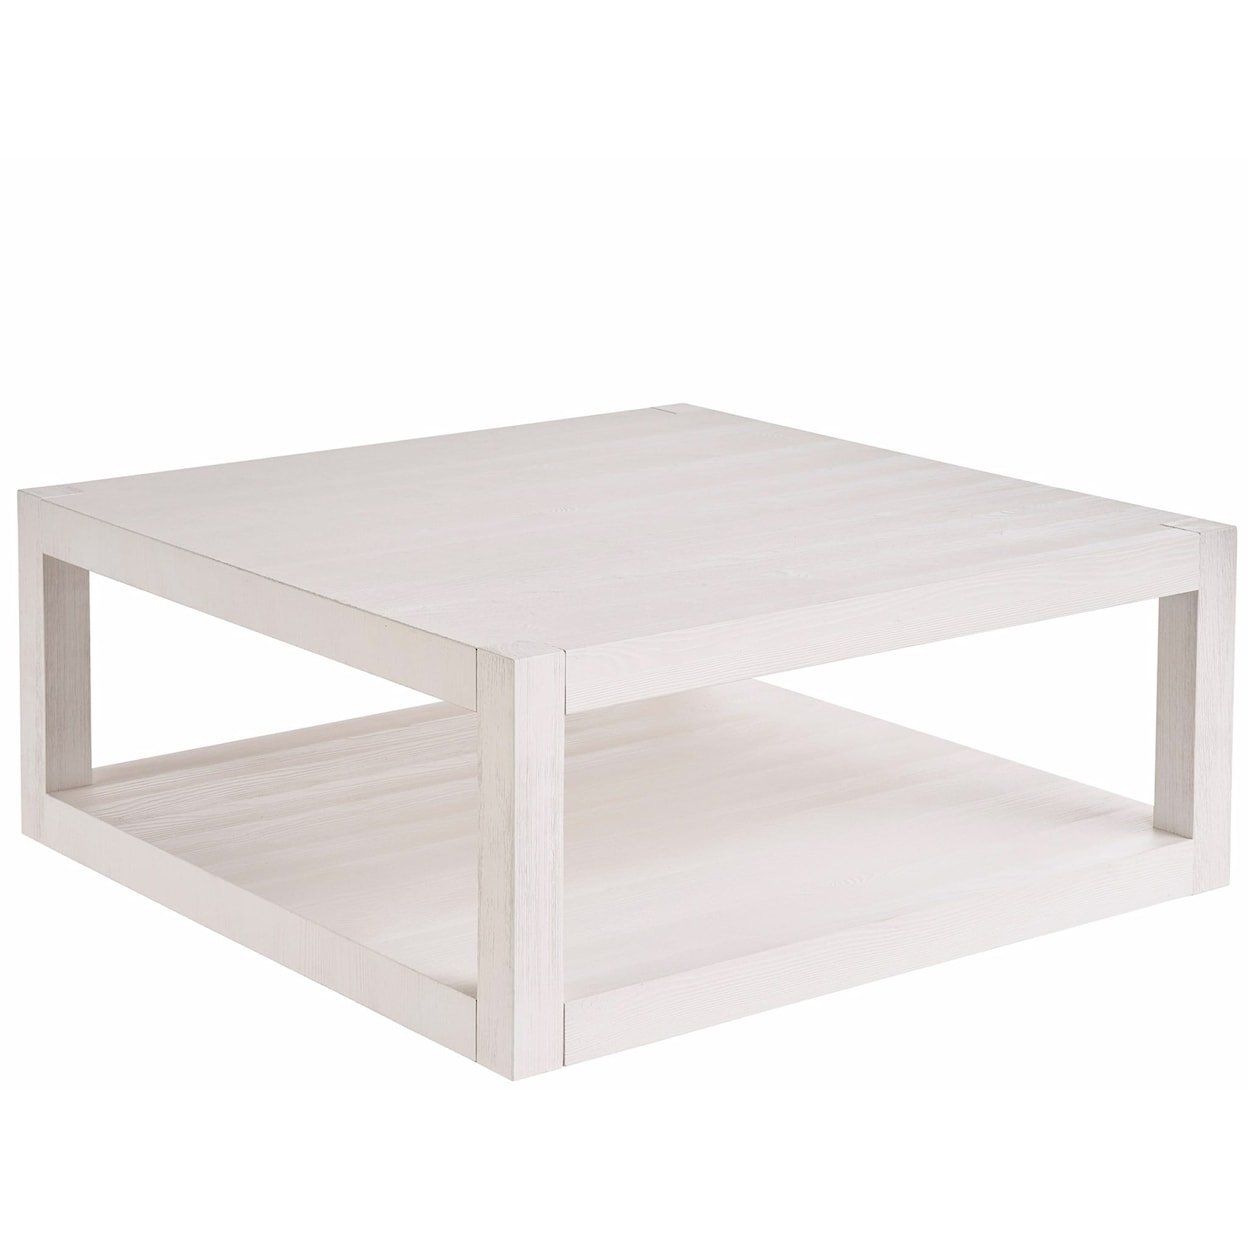 Universal Weekender Coastal Living Home Collection Square Cocktail Table